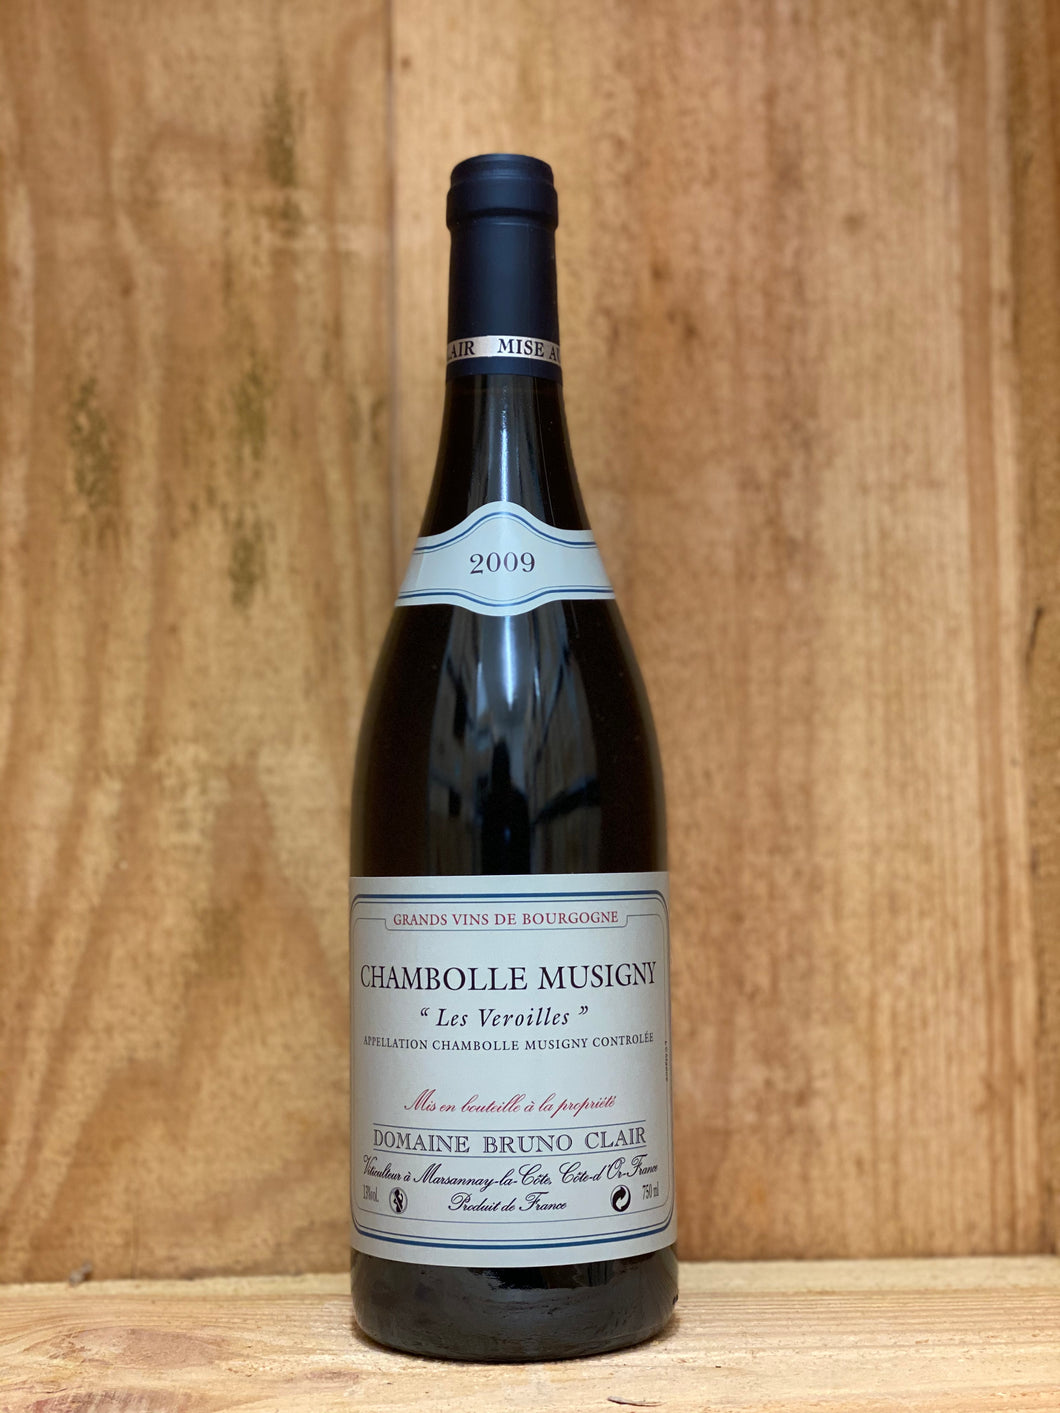 Bruno Clair 2009 Chambolle Musigny Les Veroilles